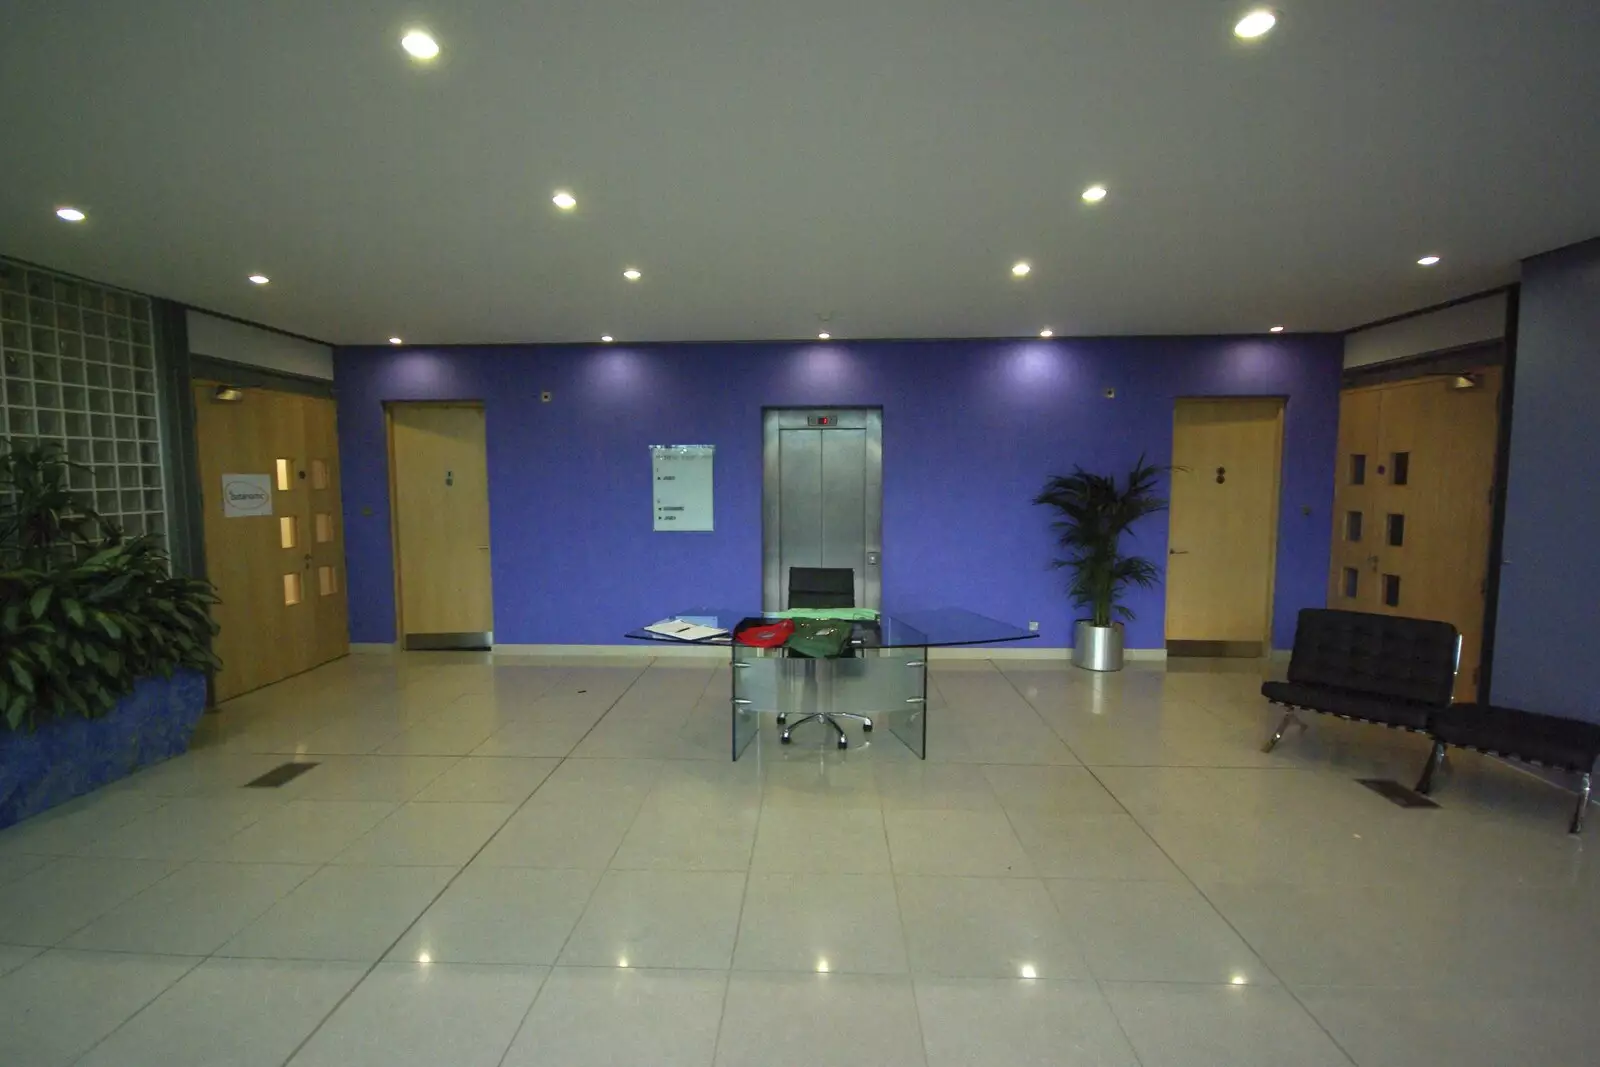 The building's reception area, from Taptu: A New Start-up, and The BBs at the Apollo Rooms, Harleston - 3rd February 2007